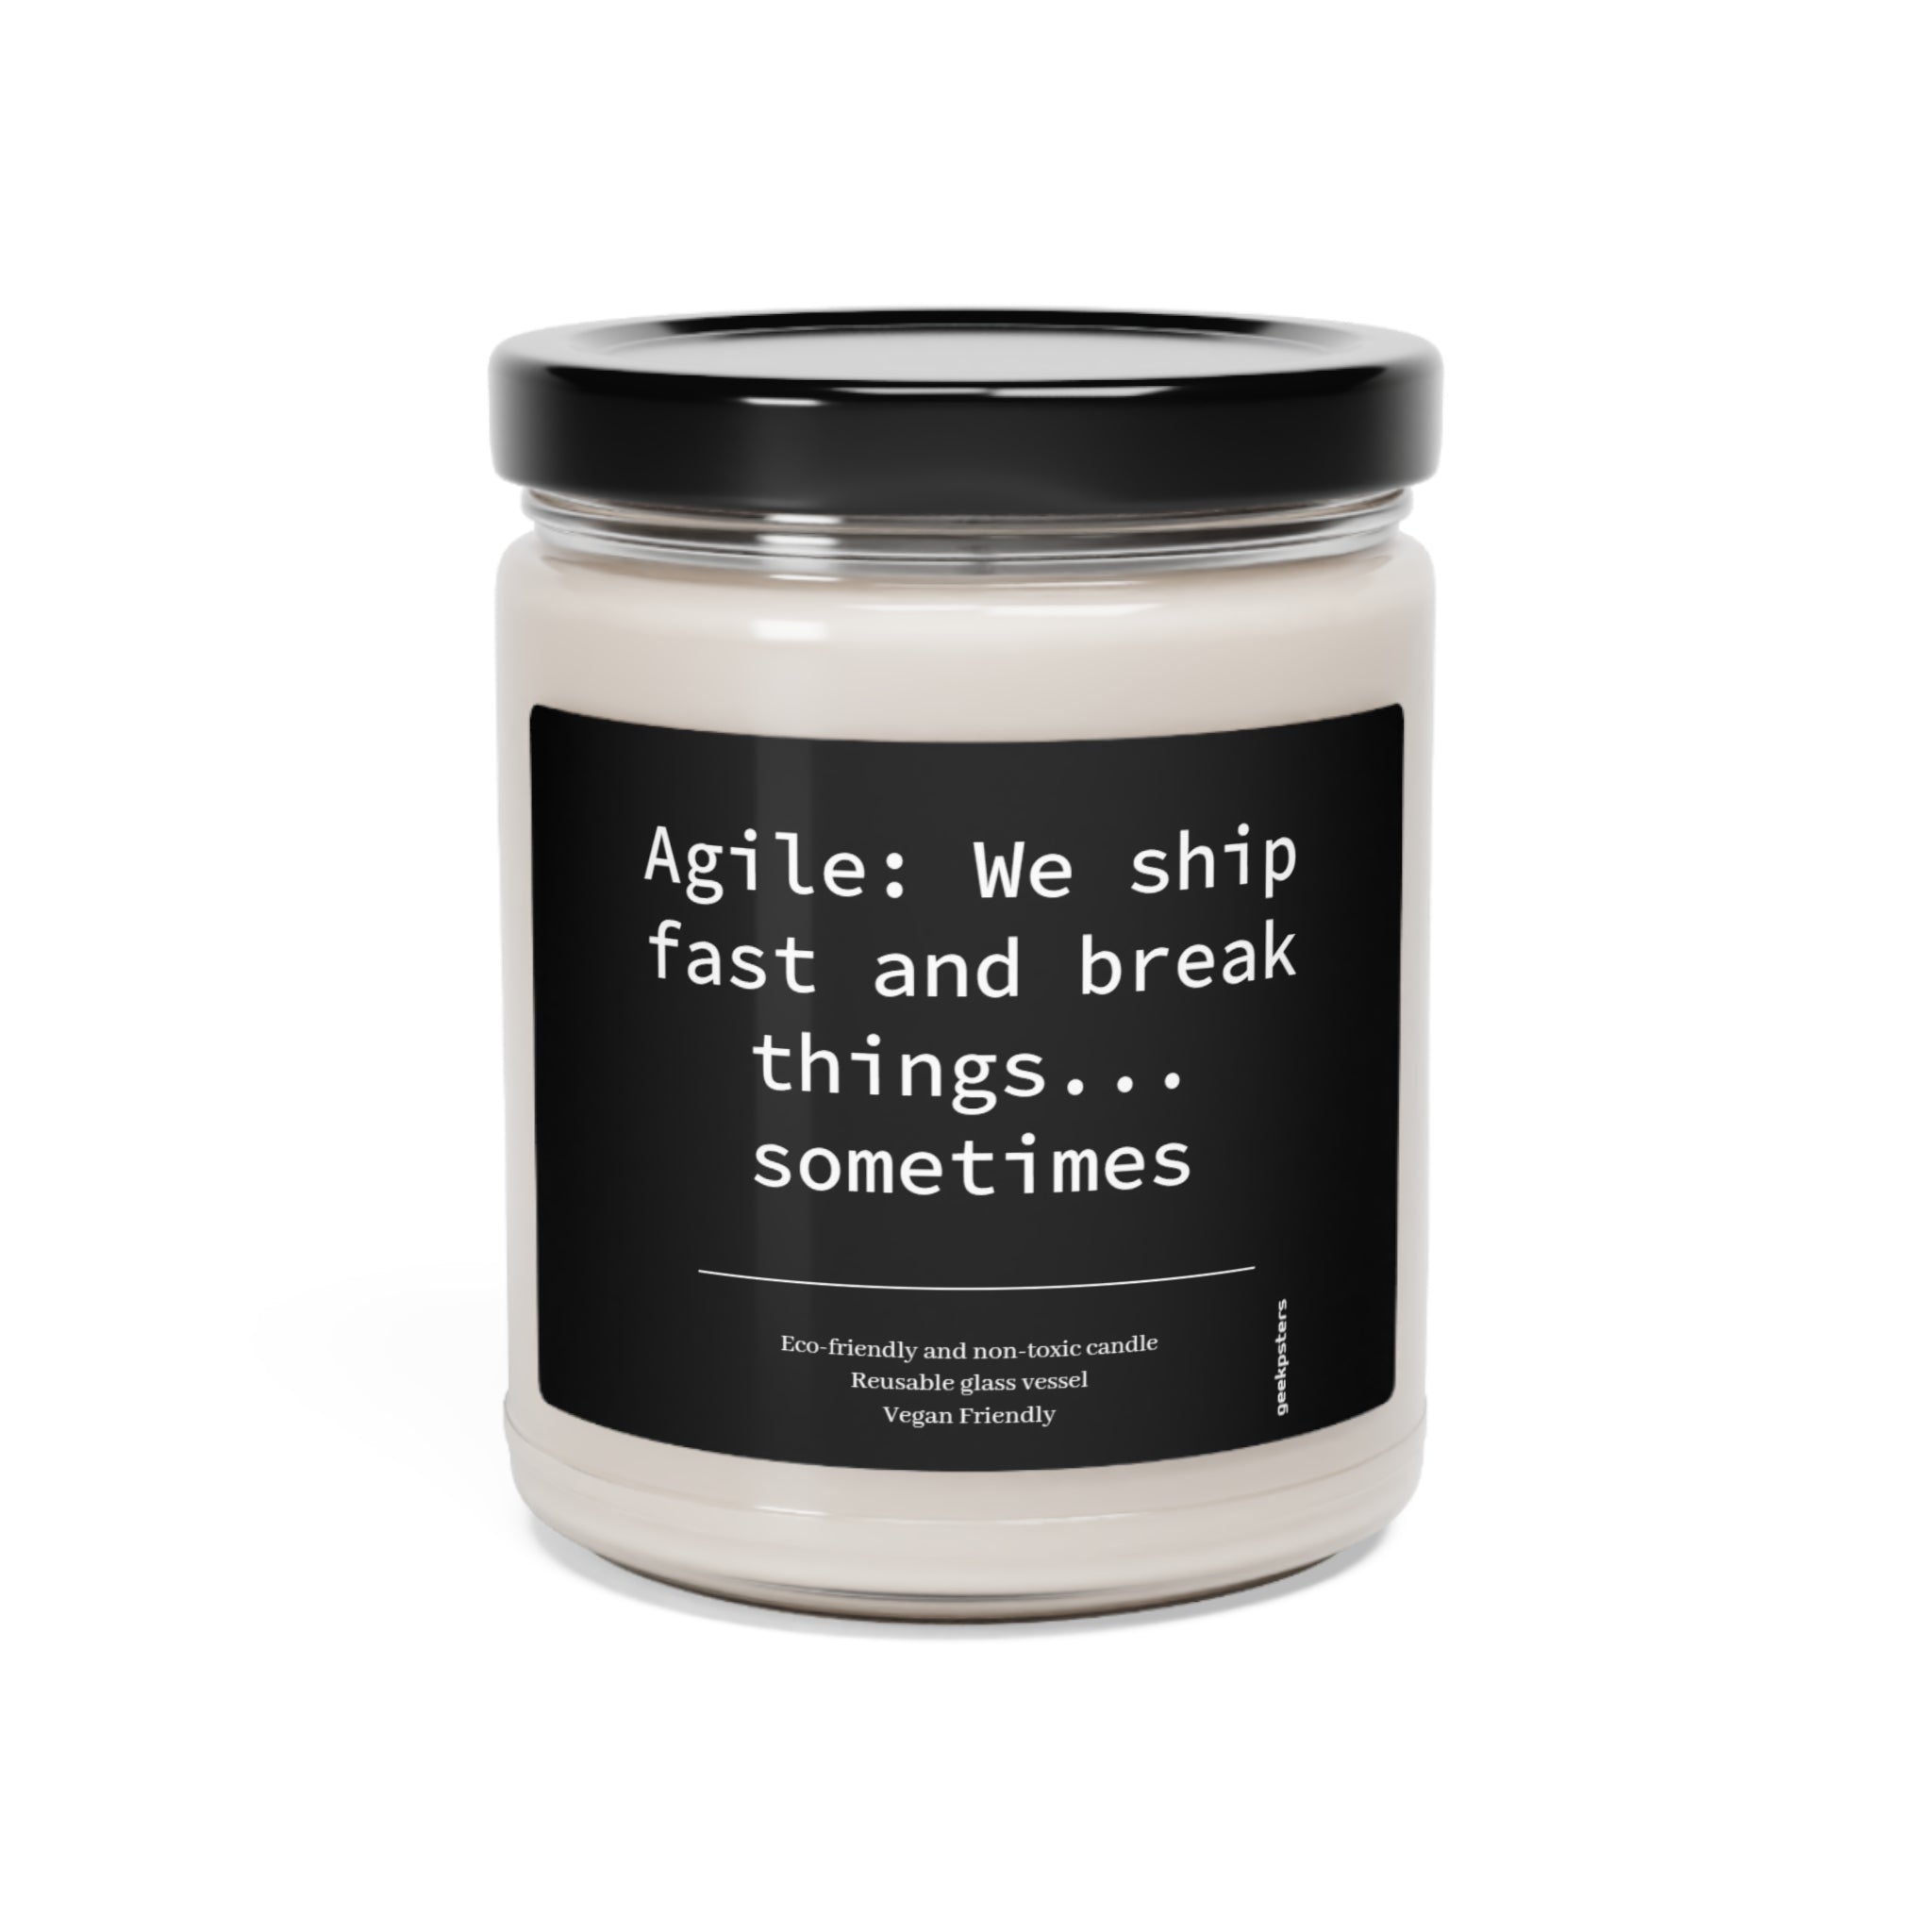 A Agile: We Ship Fast and Brake Things scented soy wax candle, highlighting eco-friendly and vegan-friendly attributes.